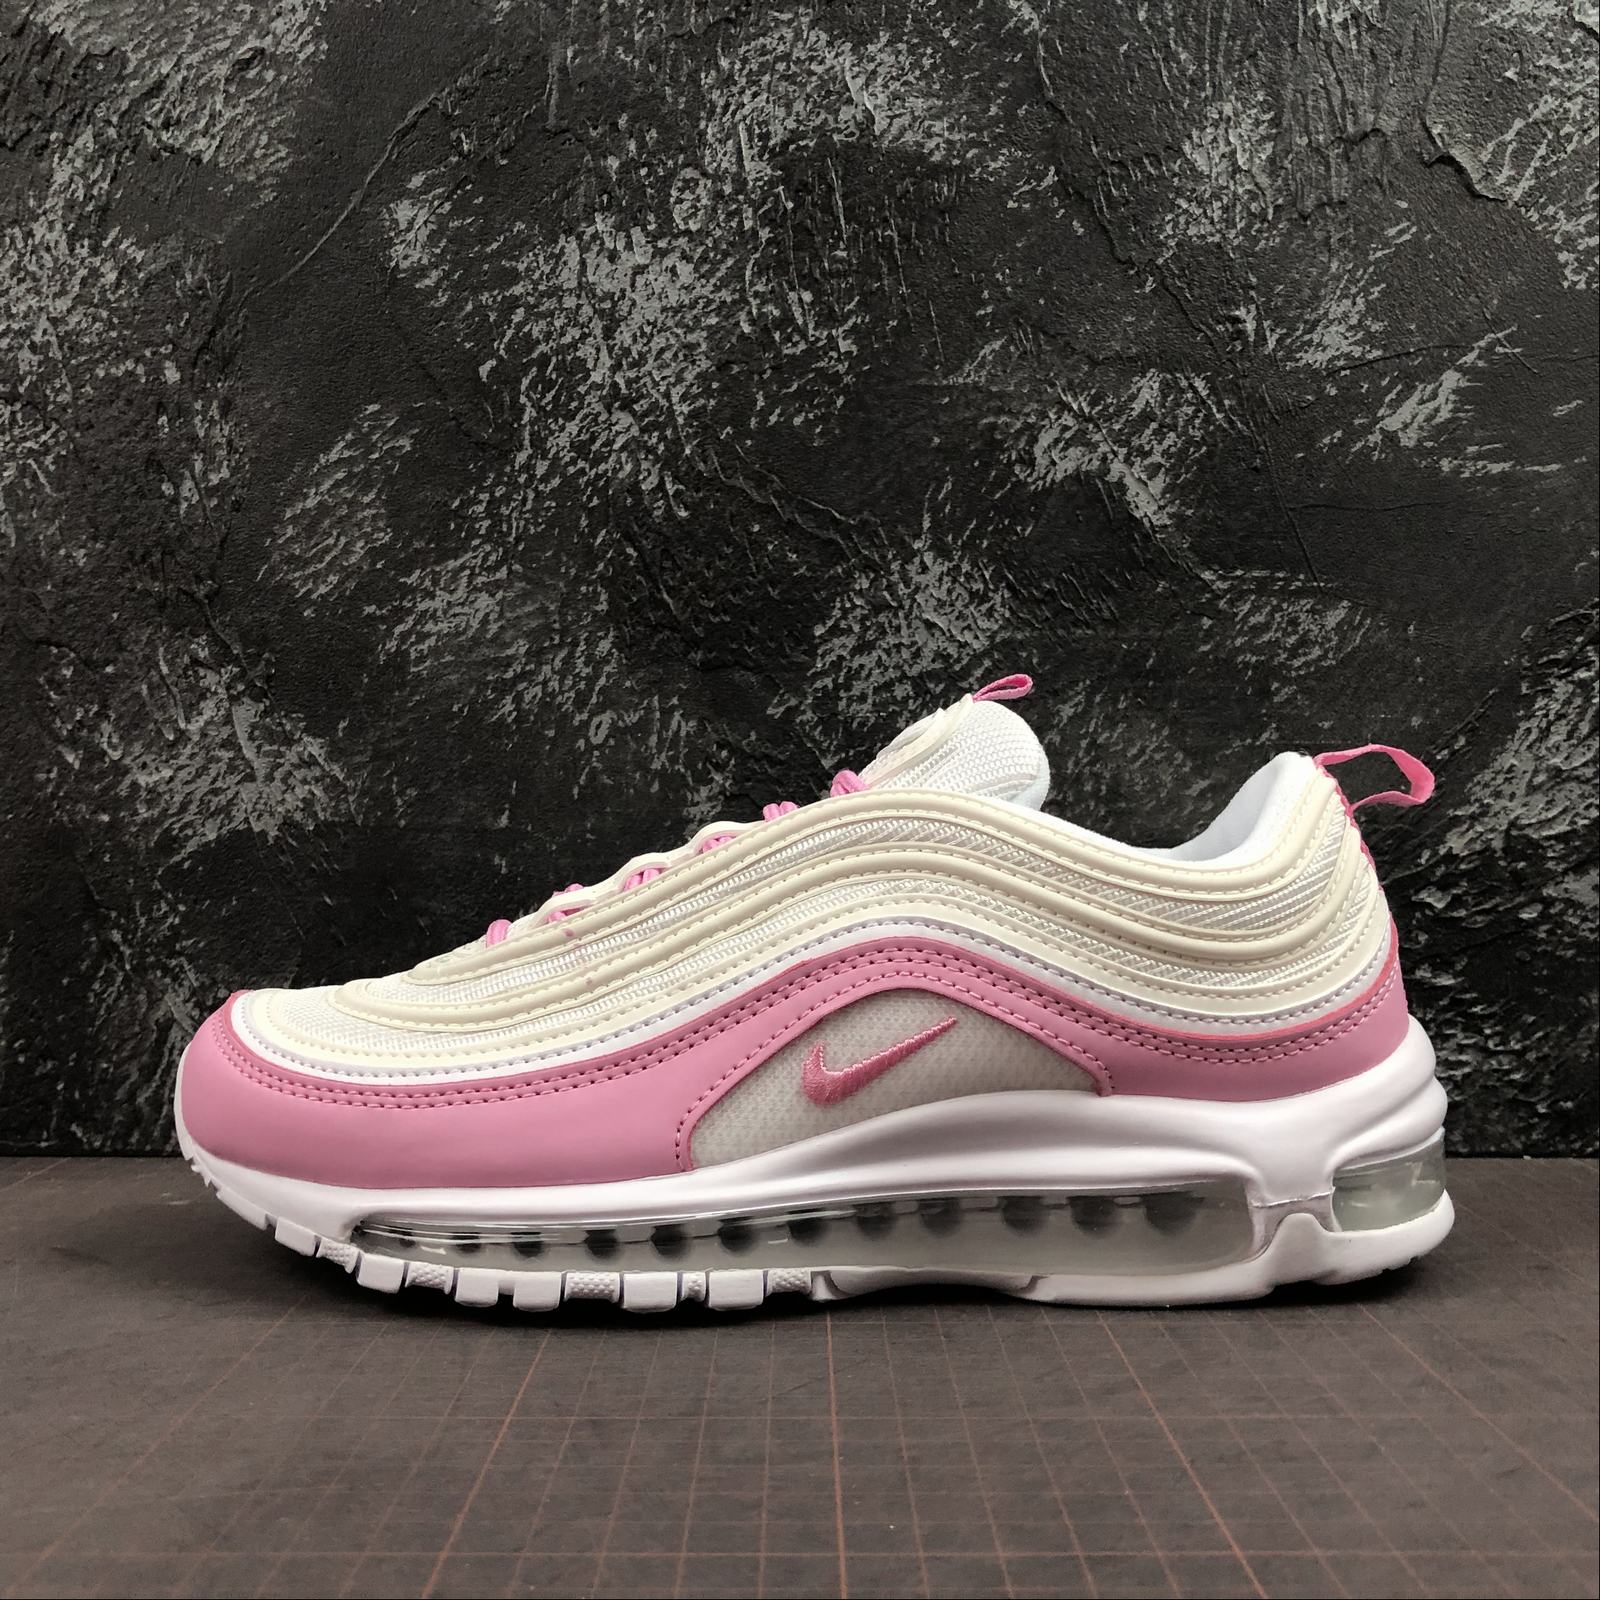 Nike Air Max 97 GS White/Psychic Pink-White For Sale